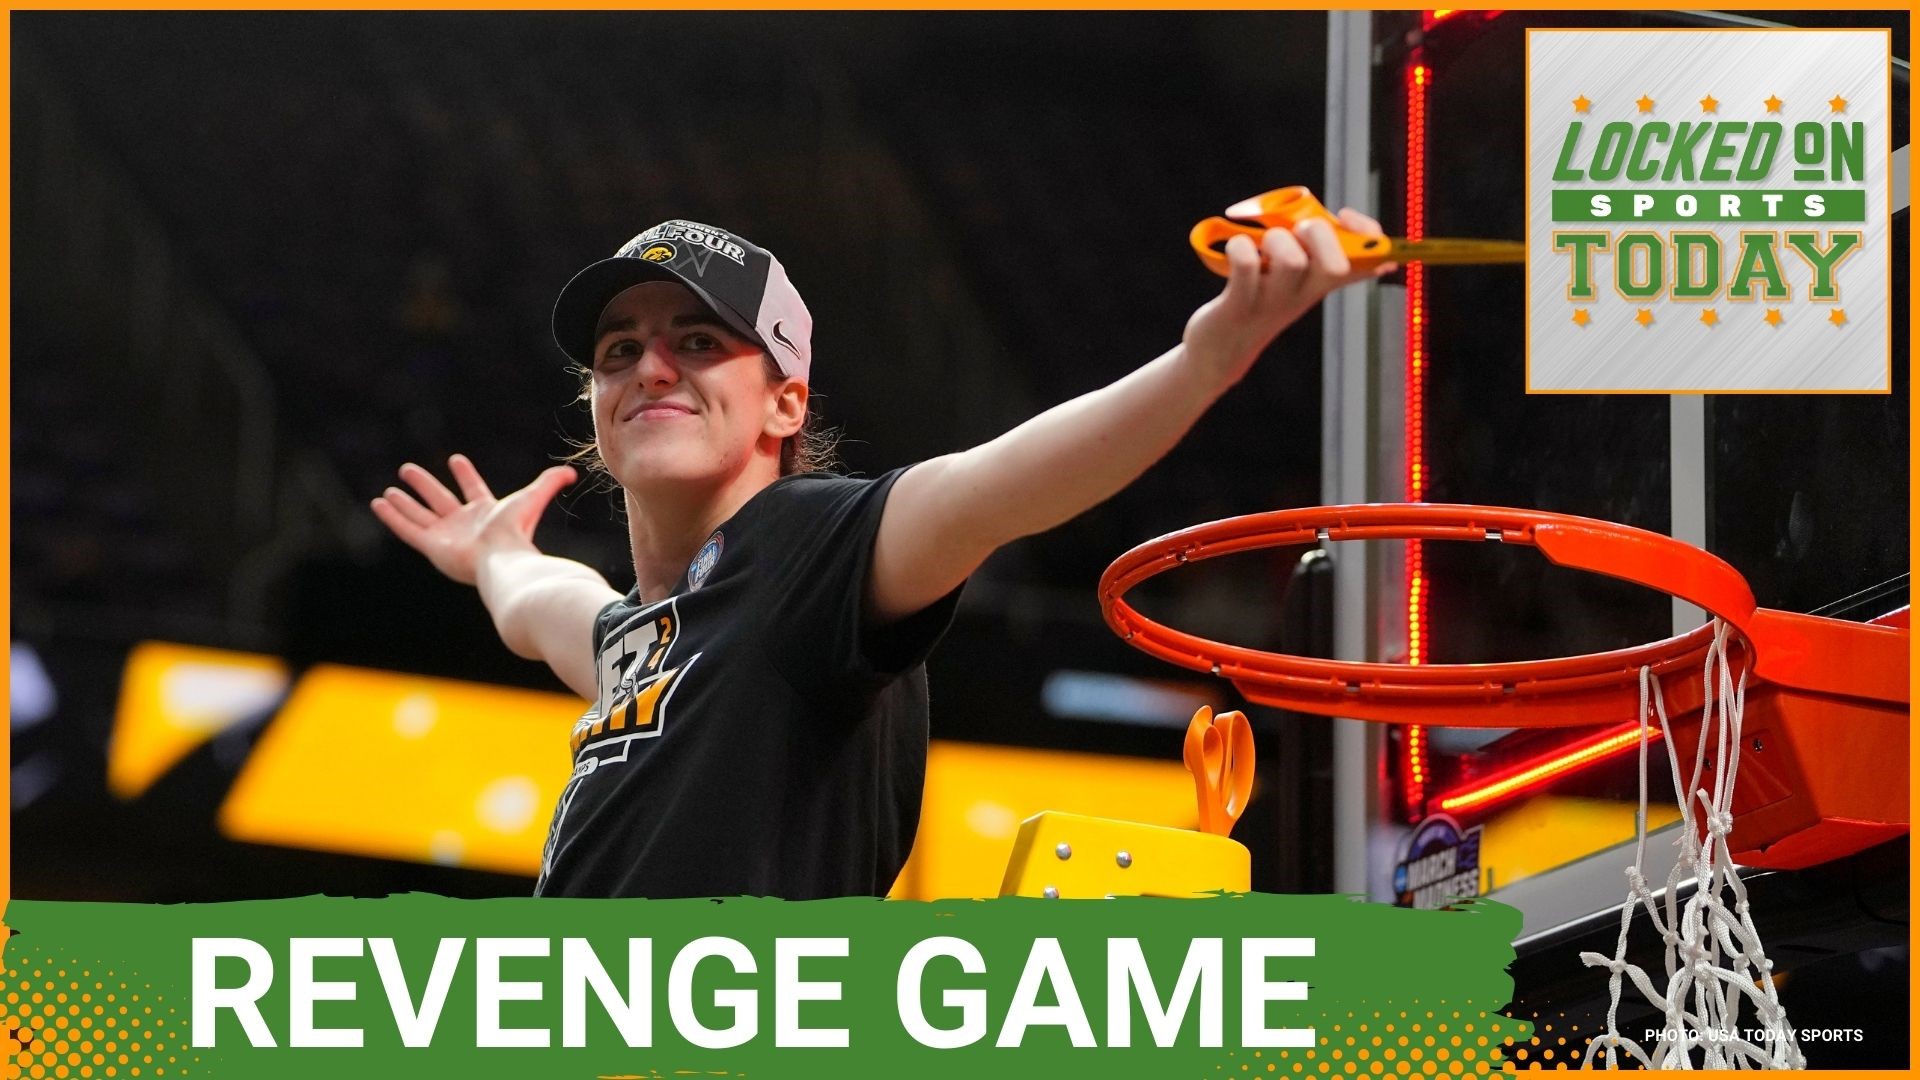 Discussing the day's top sports stories from NCAA Women's Final Four is set to Iowa's Caitlin Clark's amazing performance and locking down Juan Soto.